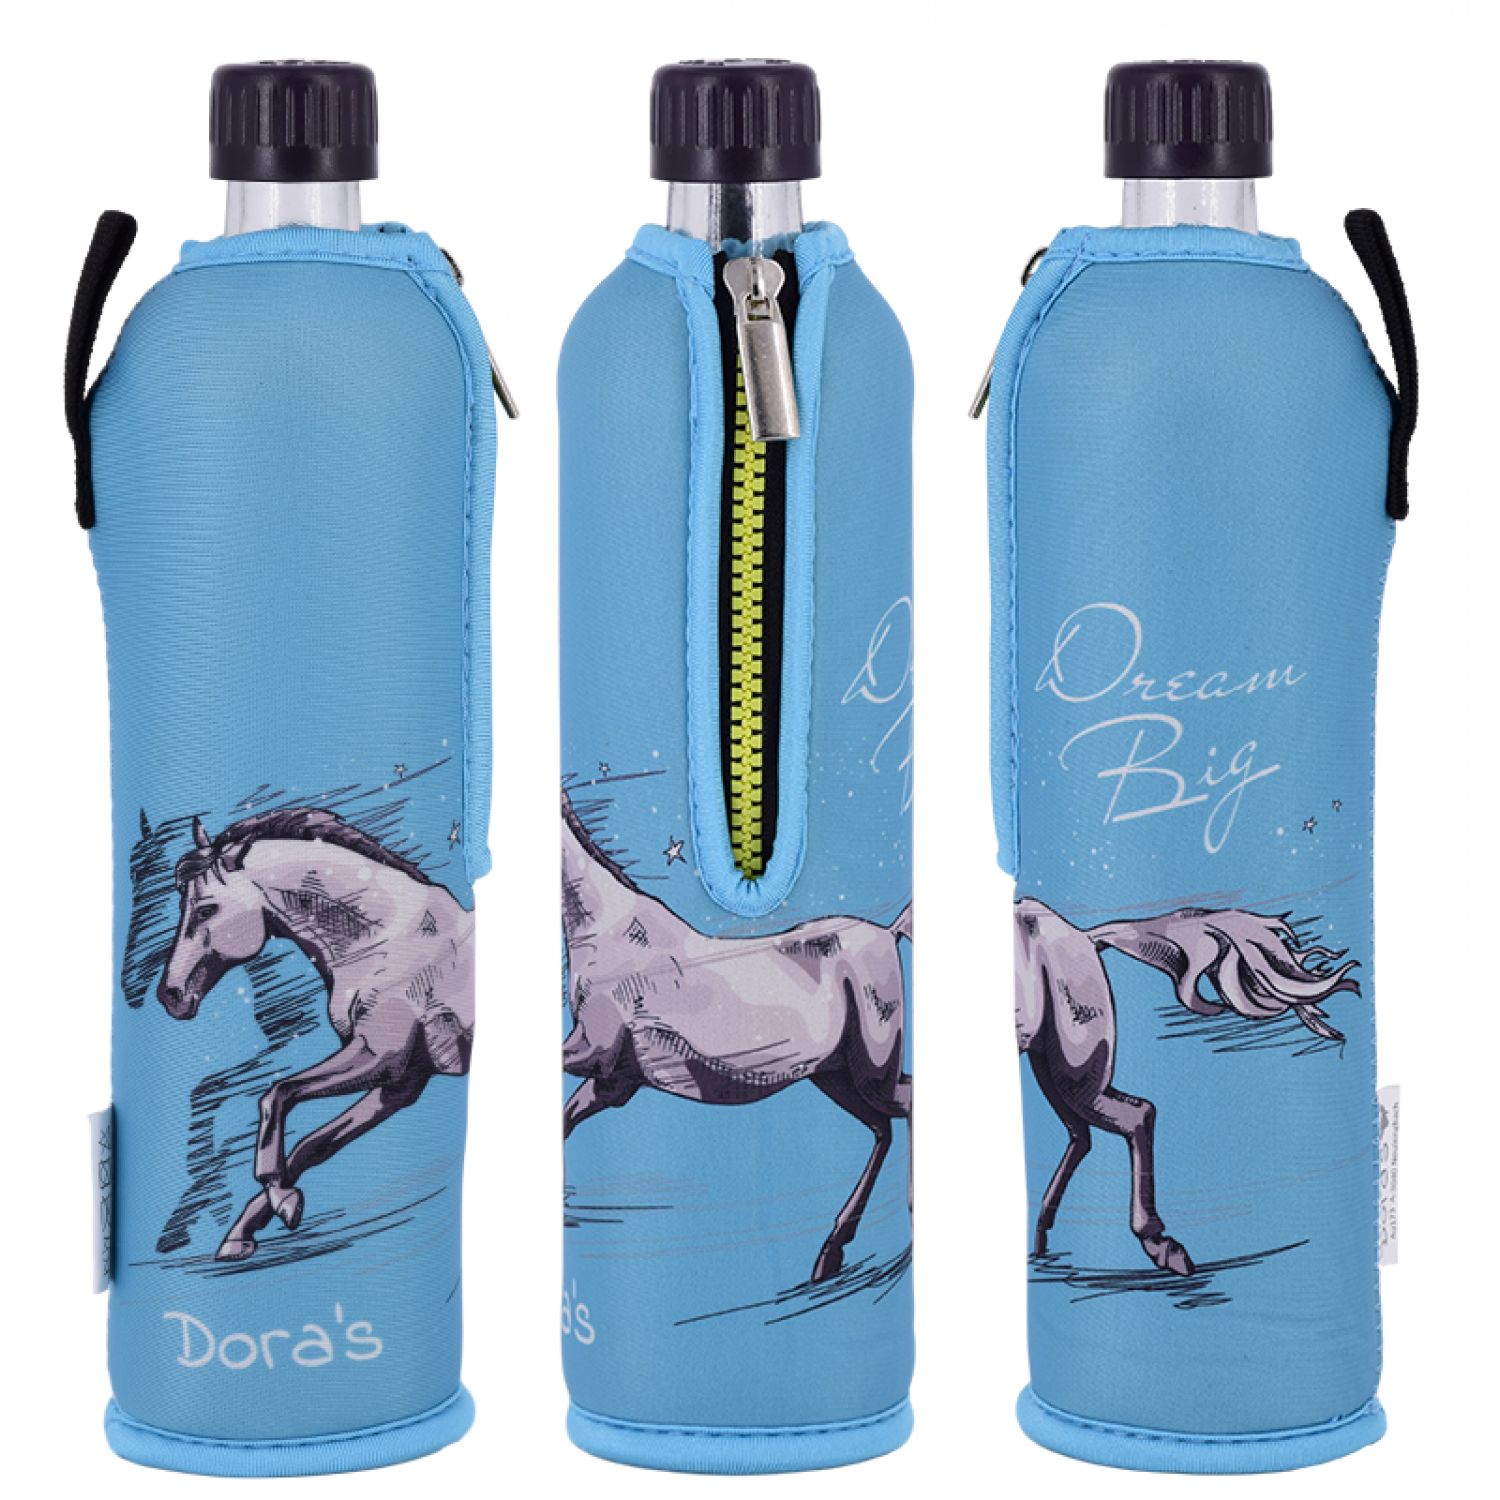 Dora's special edition: Glass Bottle with Neoprene Sleeve “Horse”